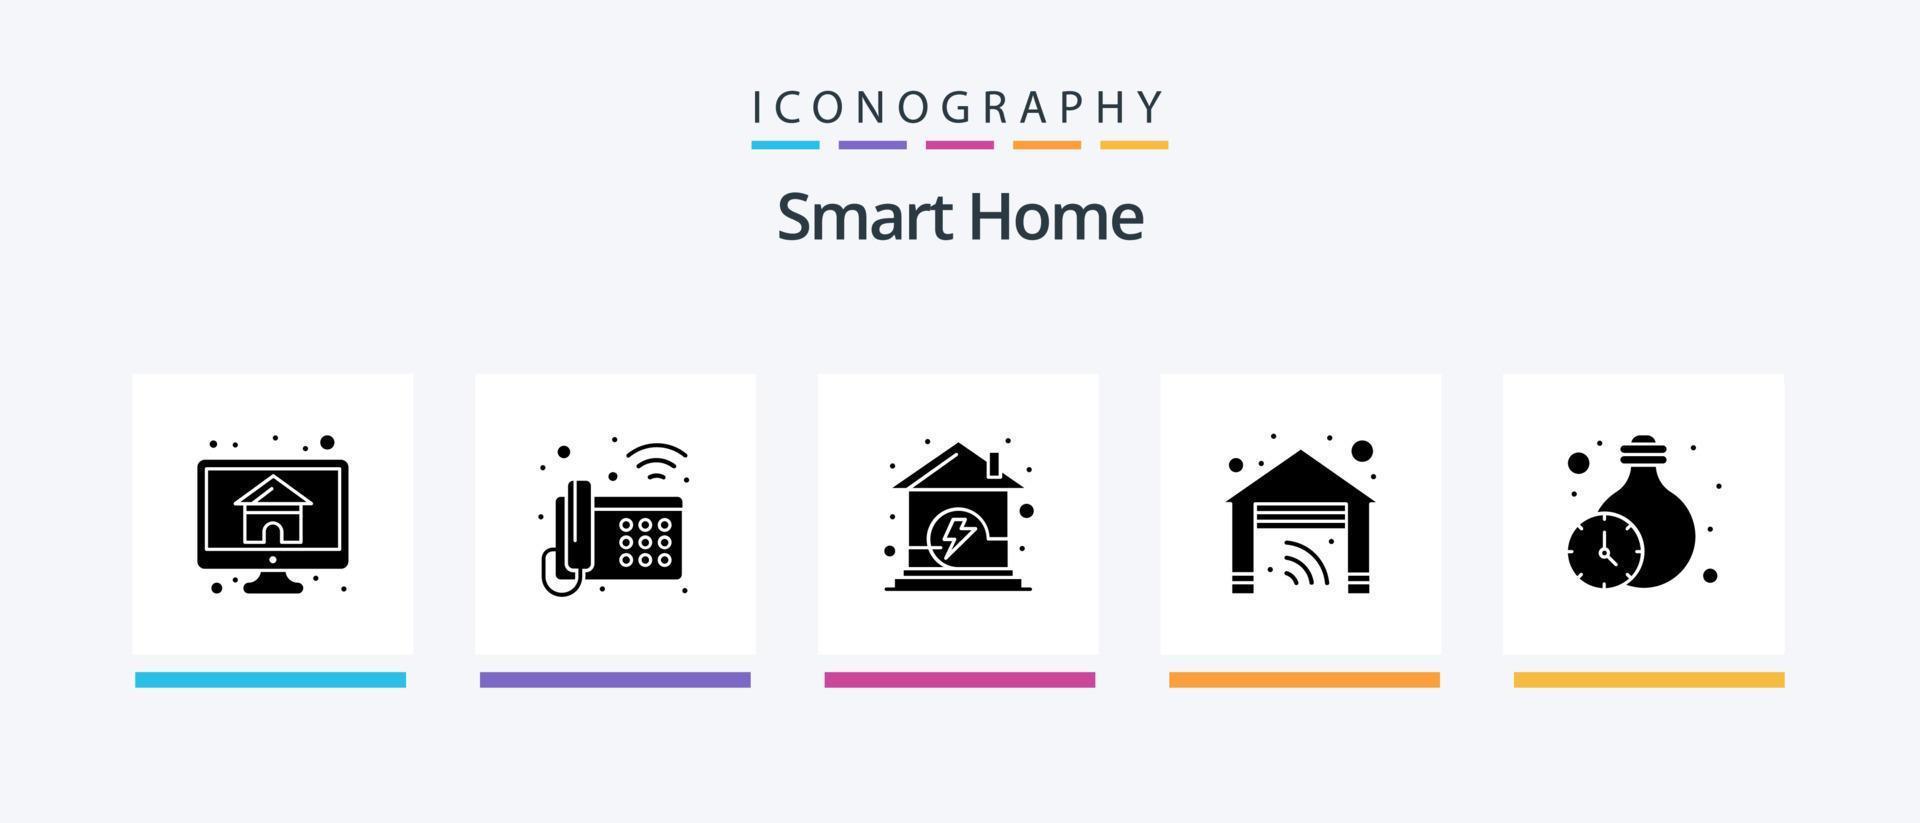 Smart Home Glyph 5 Icon Pack Including home. house. wifi. home. power. Creative Icons Design vector